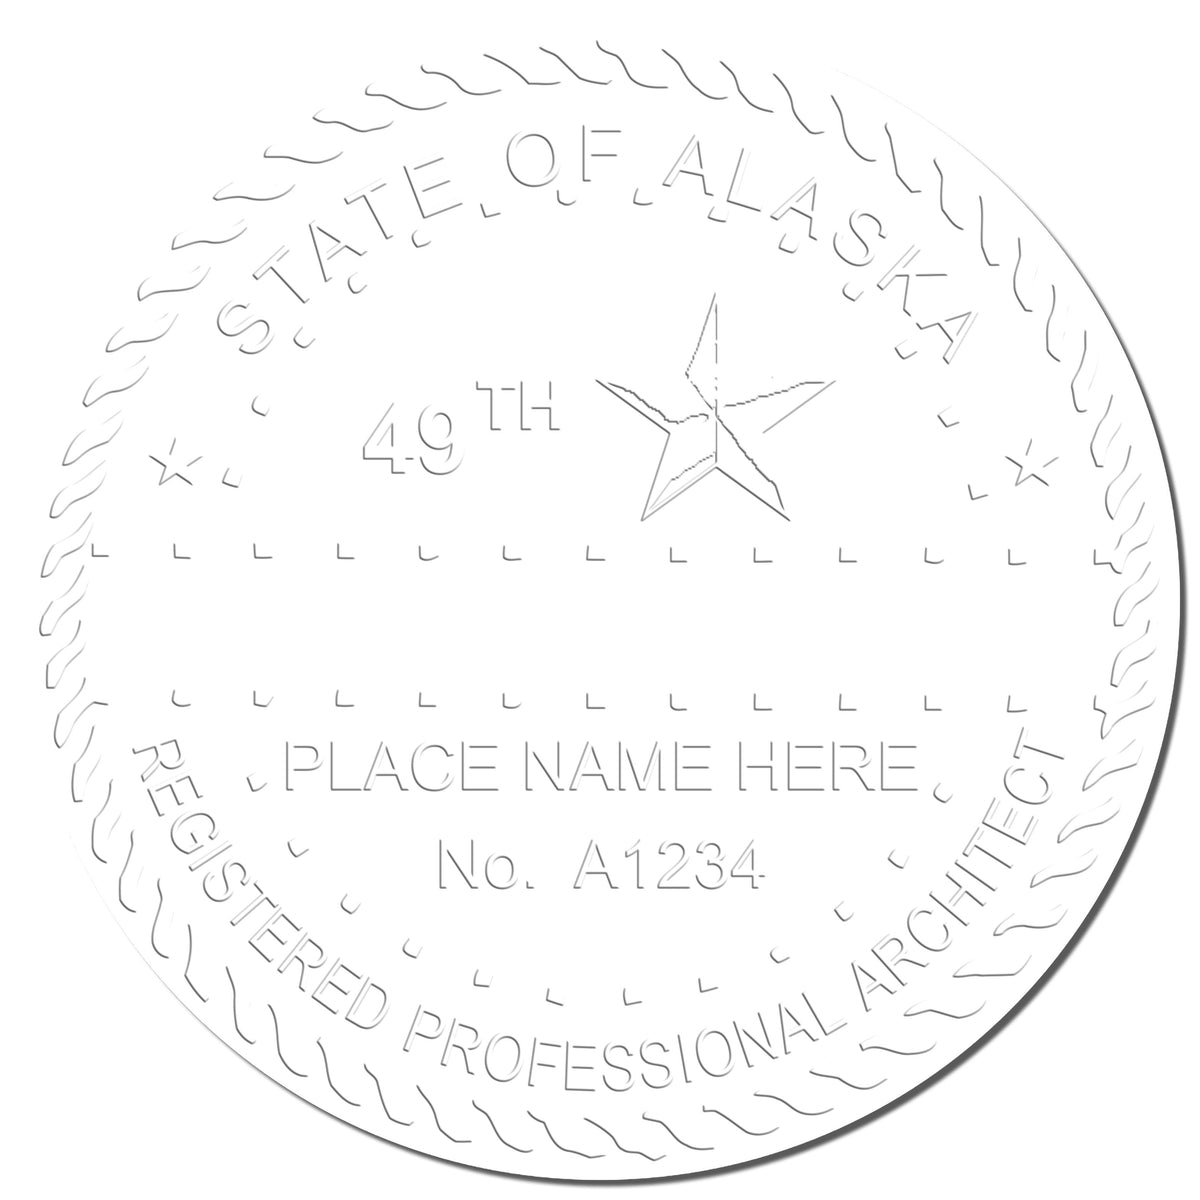 This paper is stamped with a sample imprint of the State of Alaska Architectural Seal Embosser, signifying its quality and reliability.